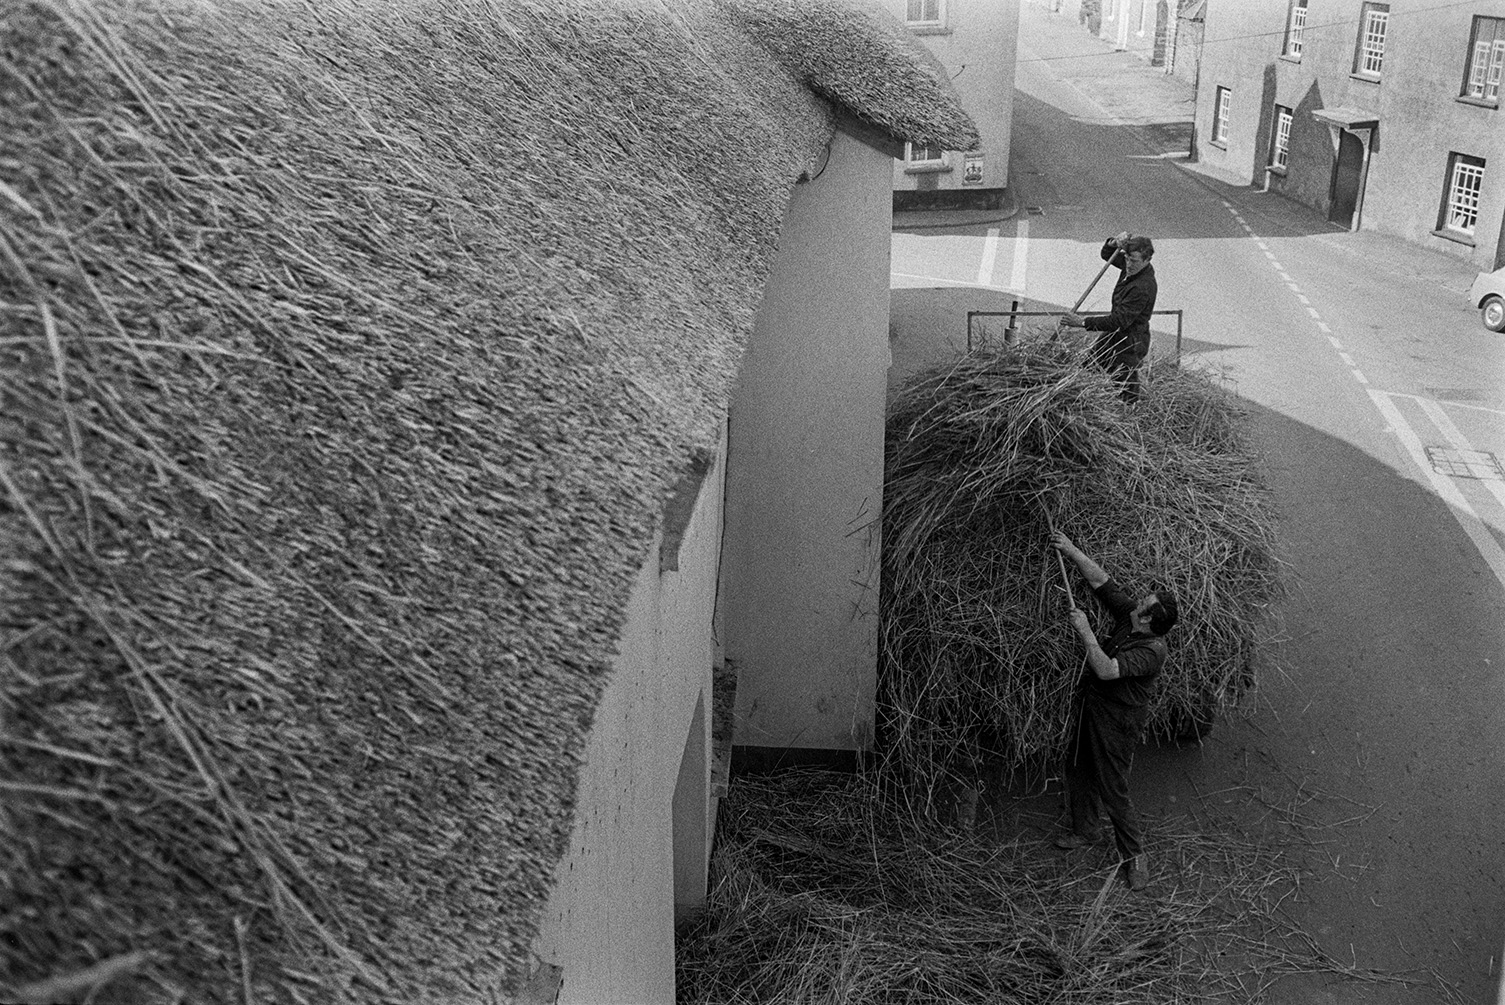 View of men loading old thatch reed onto a trailer in a street in Witheridge. The image is  taken from the roof top which is being thatched.